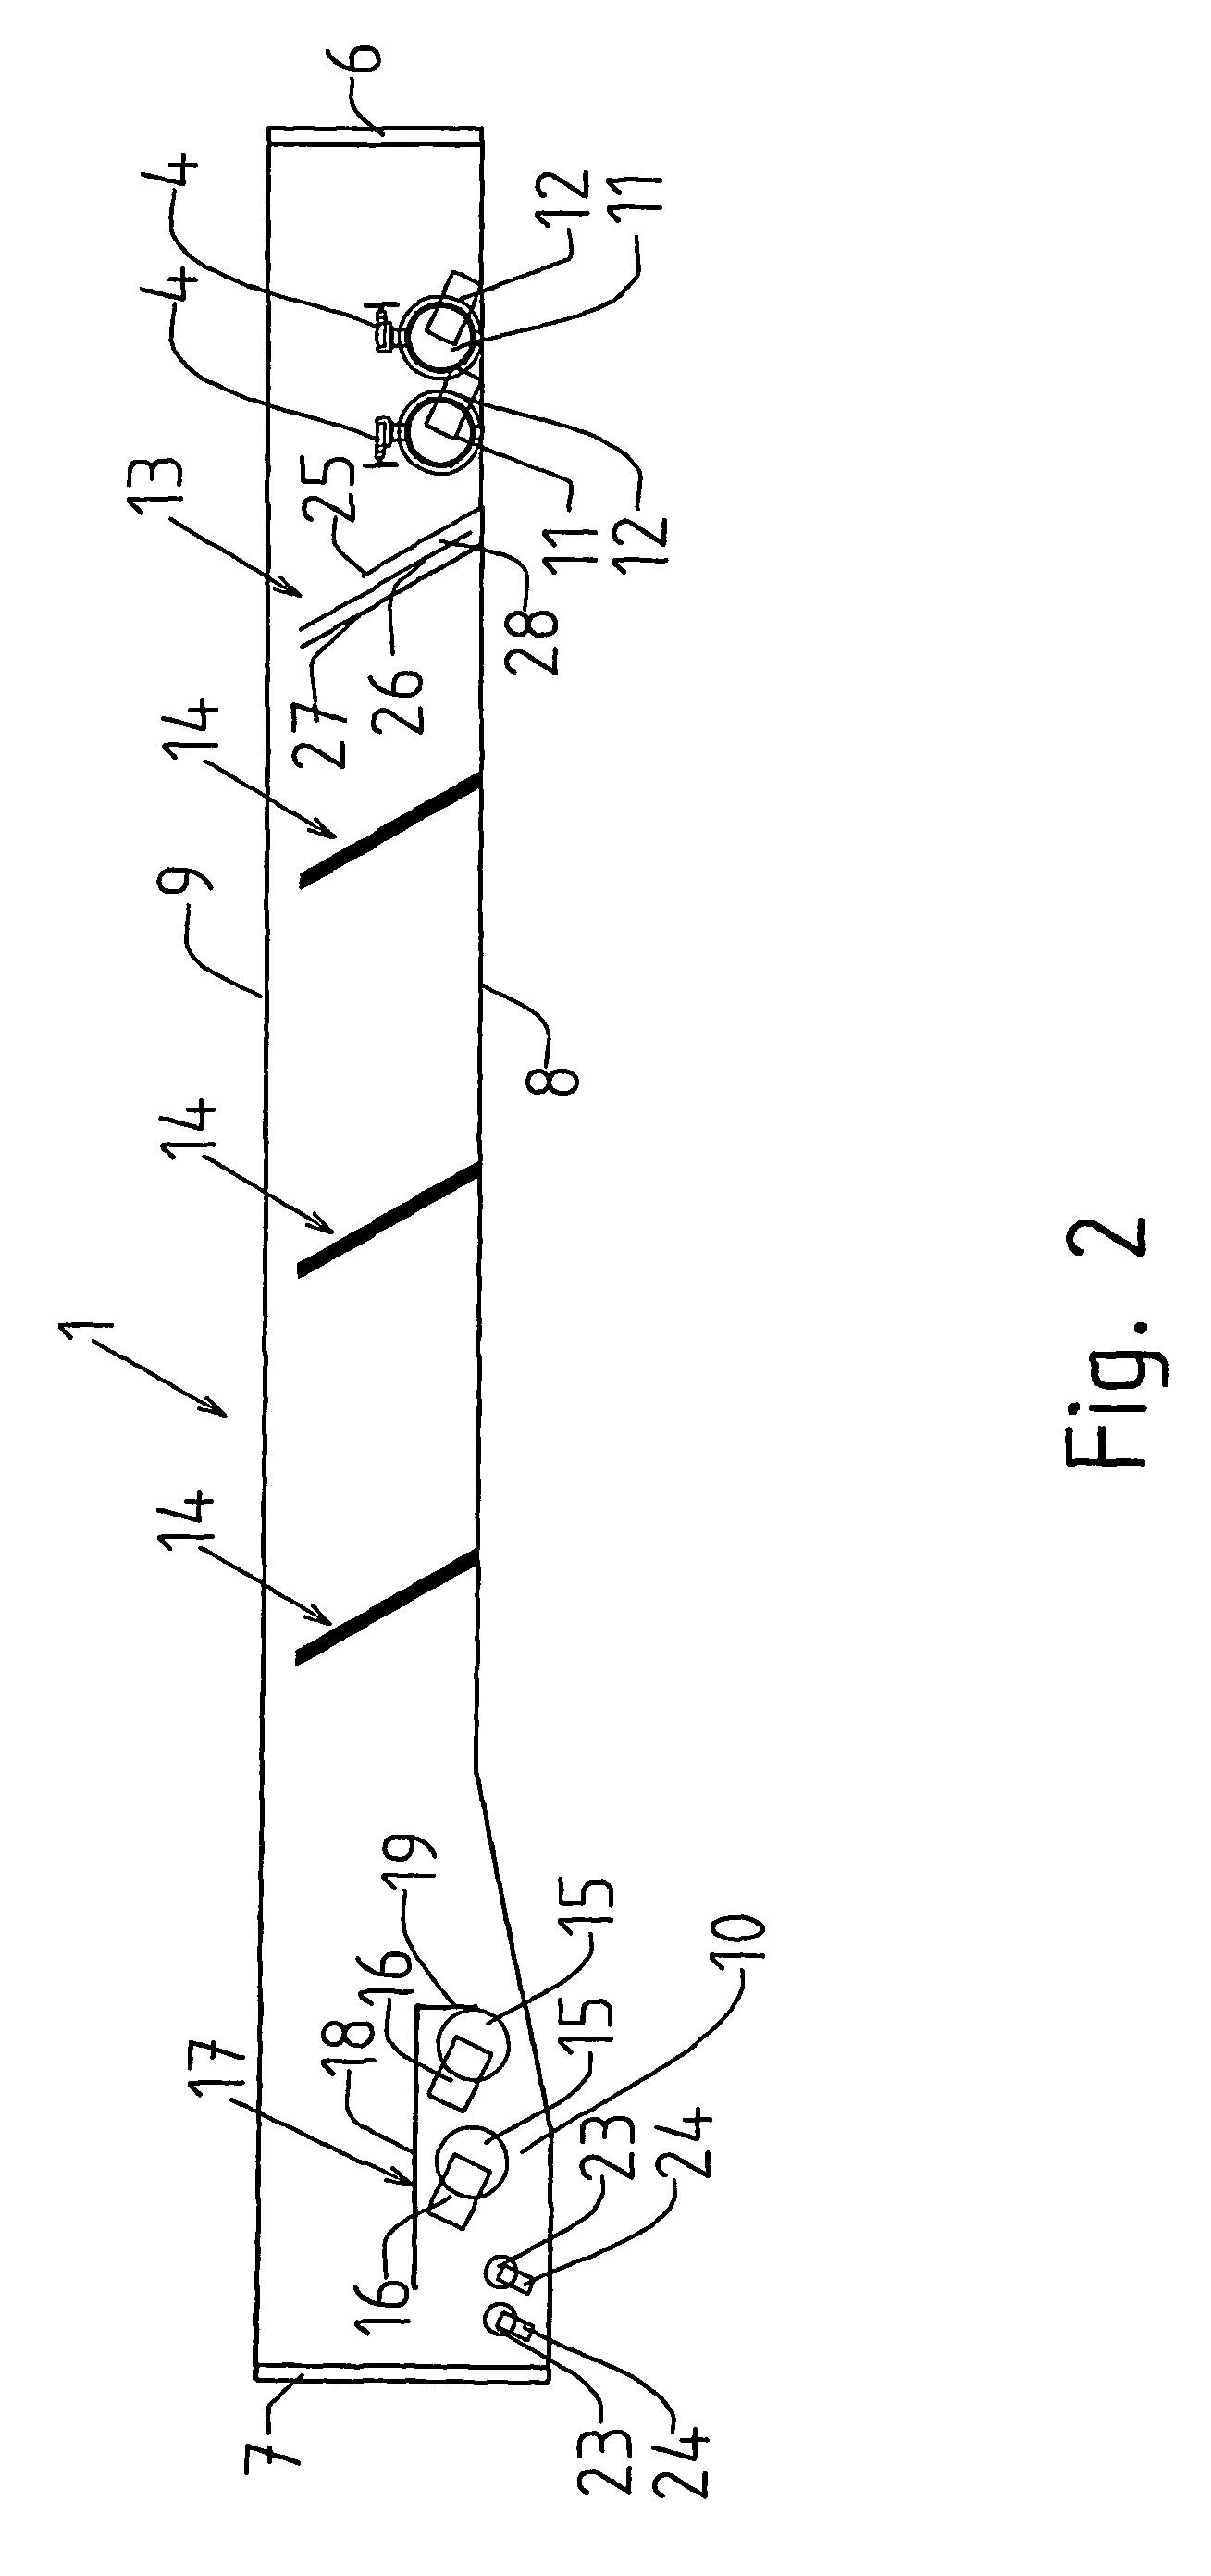 Method and equipment for purifying an extraction solution from aqueous entrainment and impurities